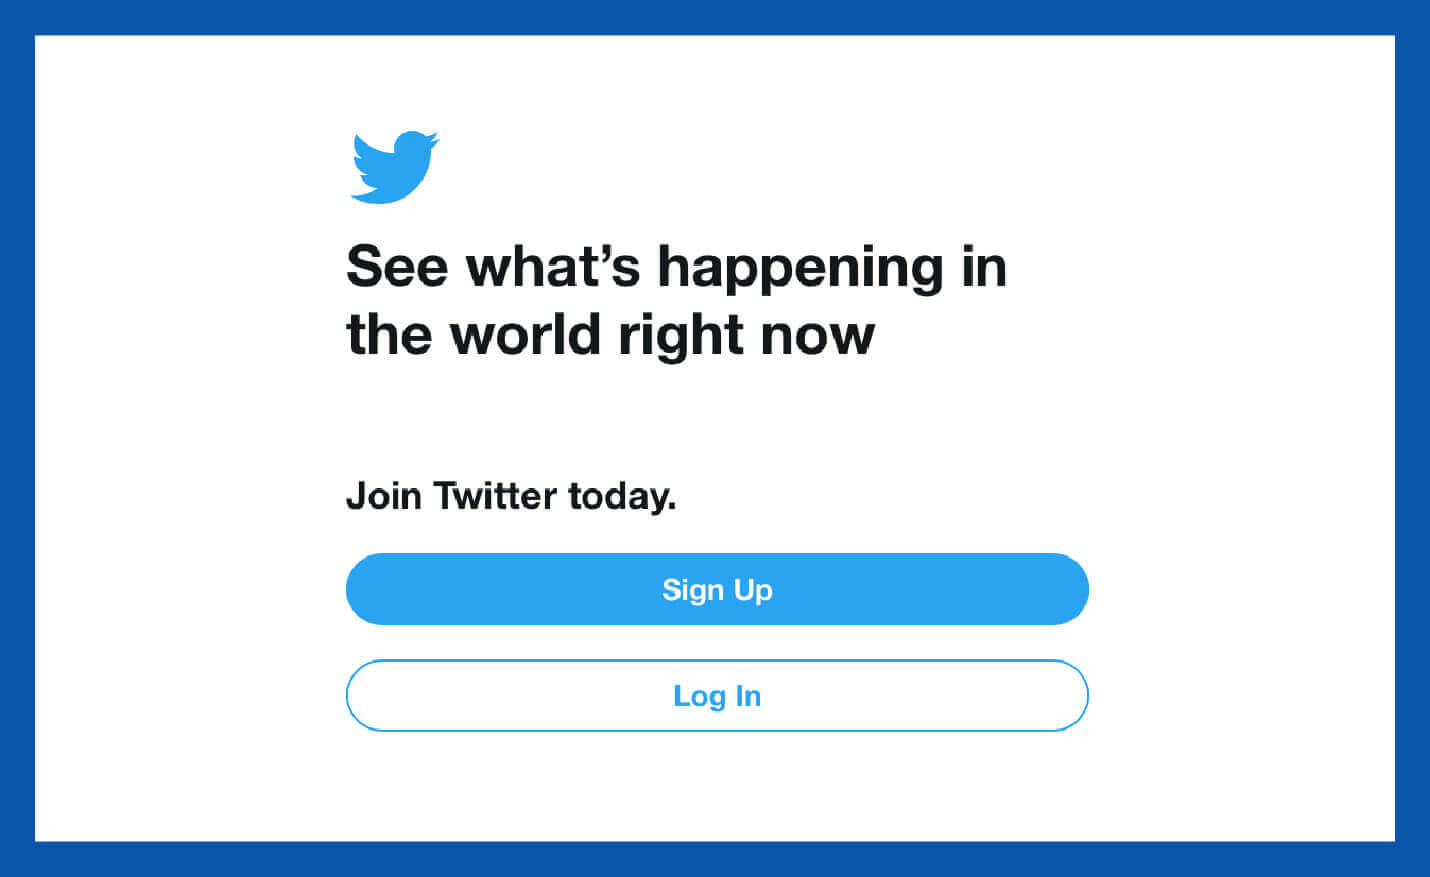 value proposition example from Twitter landing page to see what's happening in the world right now